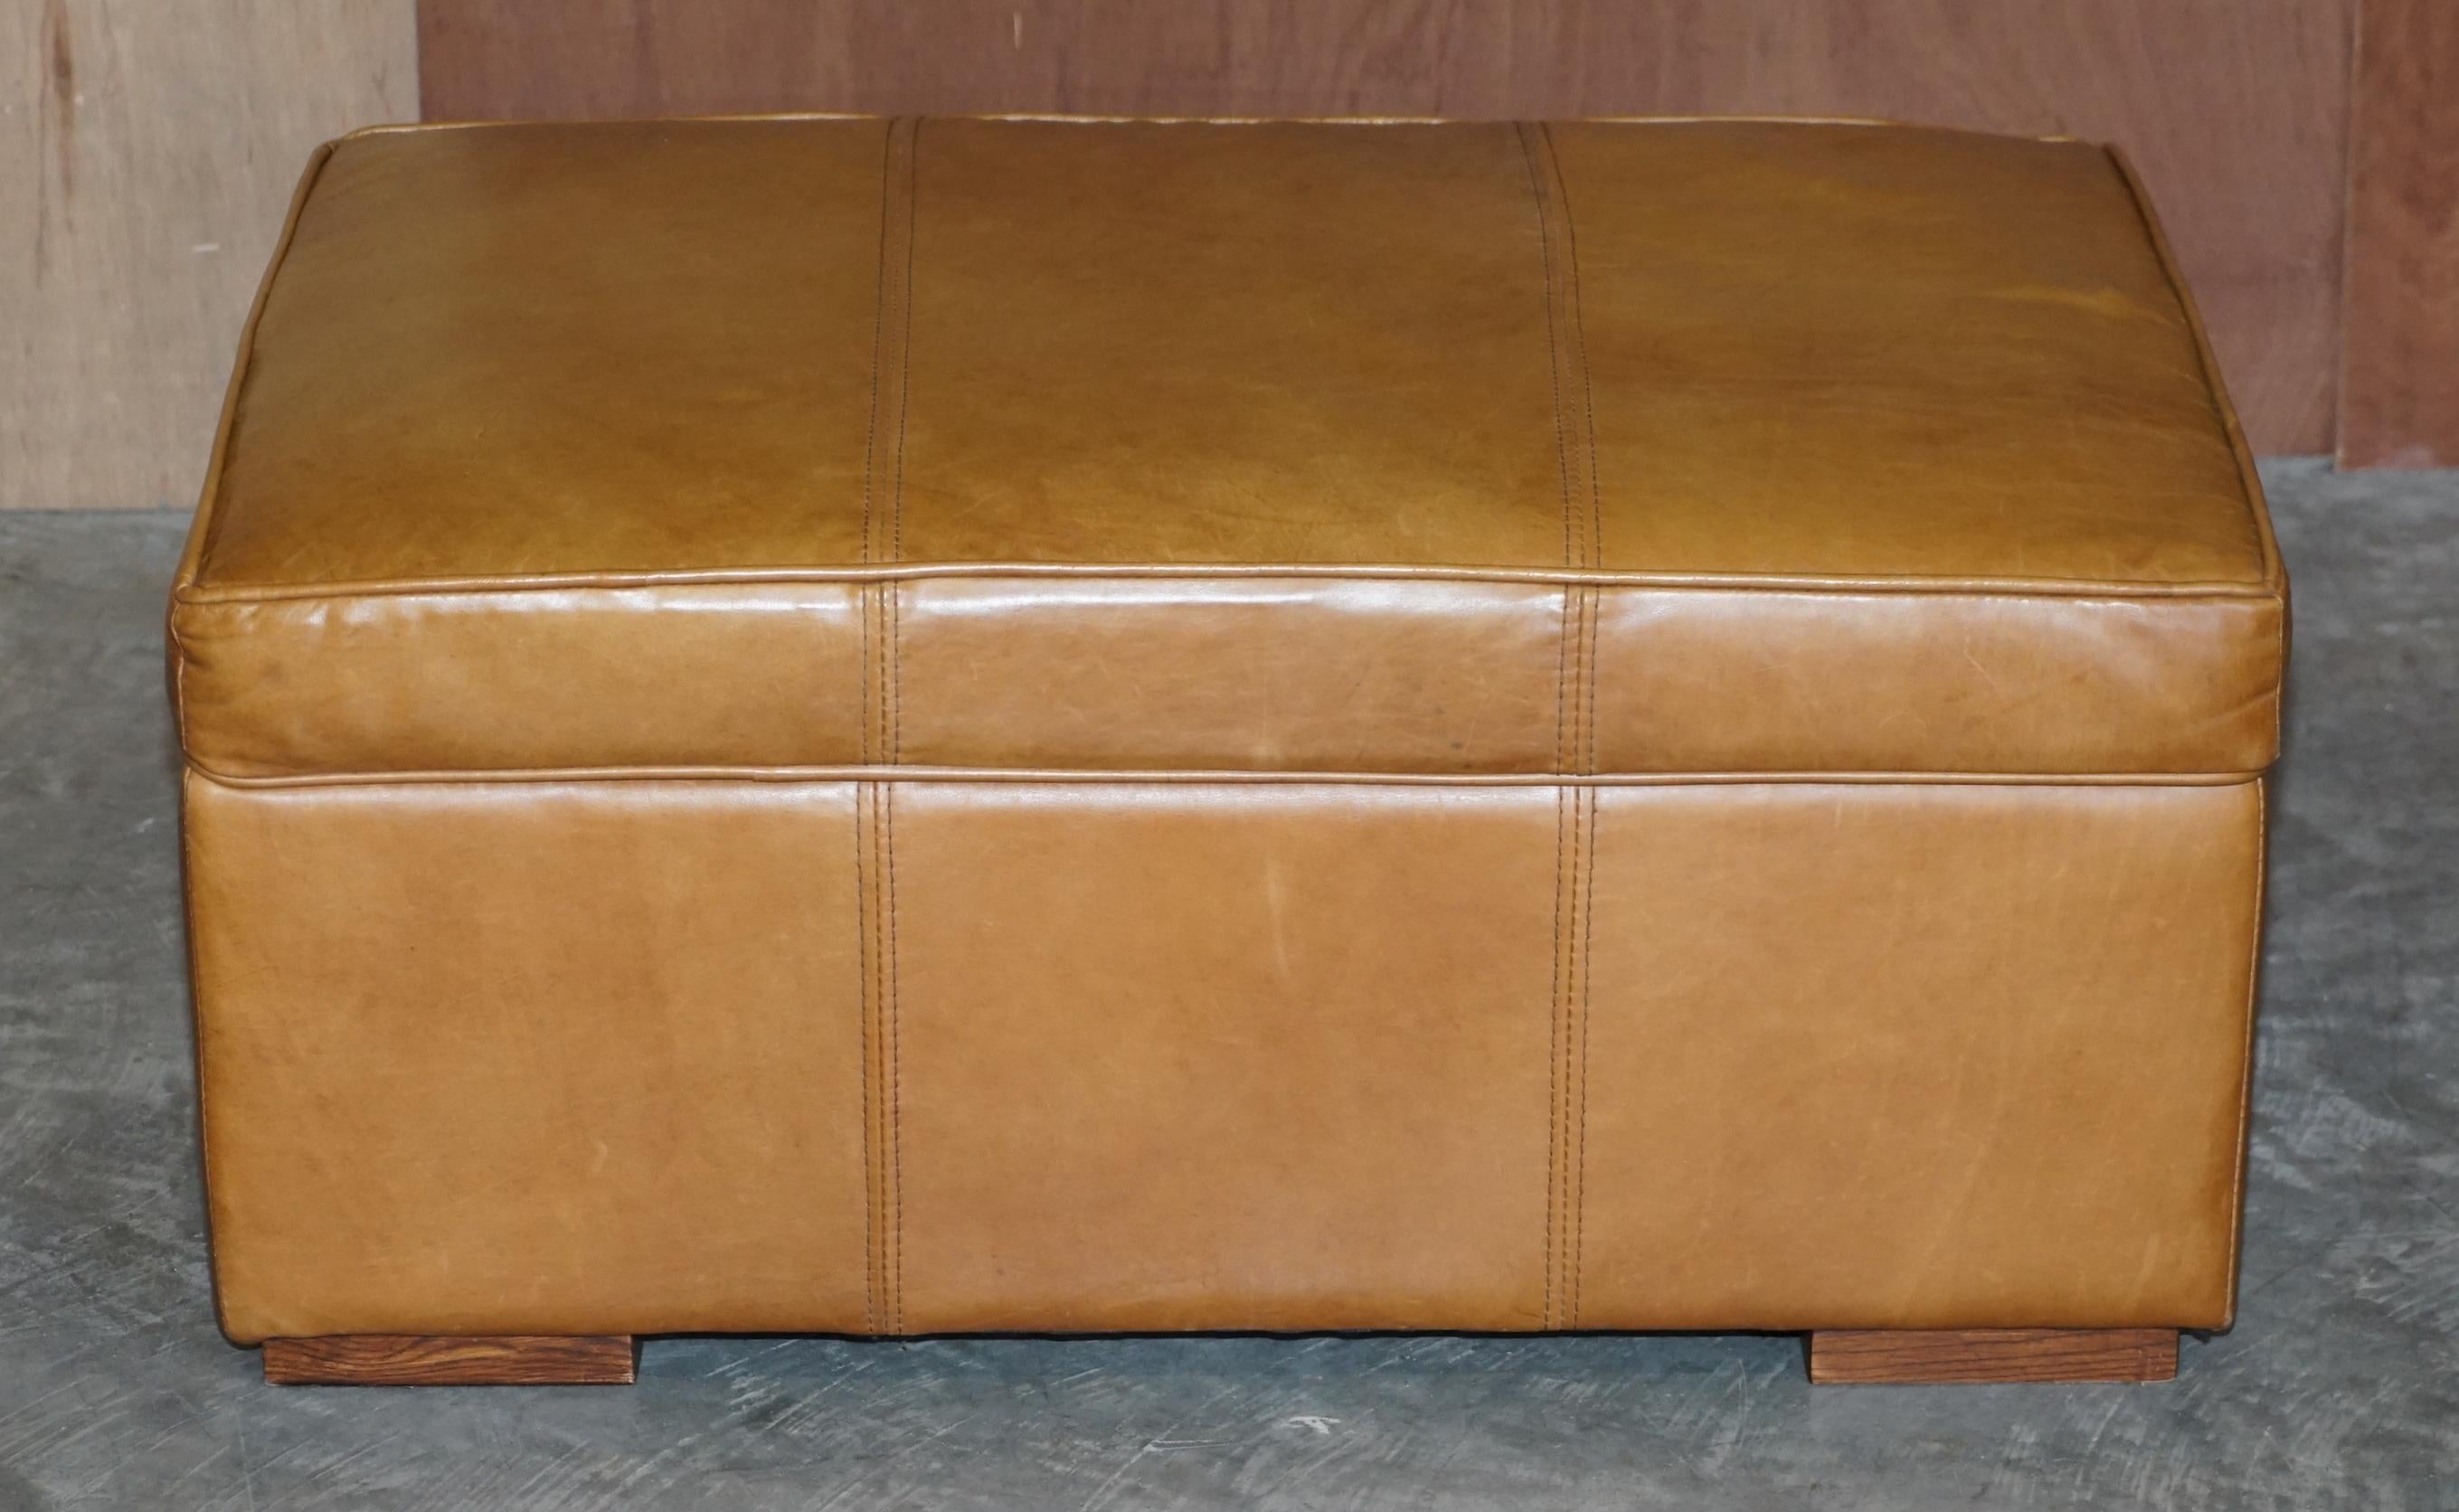 We are delighted to offer this perfect condition unused large Halo ottoman footstool with internal storage which matches the Groucho Reggio range 

This piece is larger than normal, if placed in the middle of two sofas or four armchairs it could